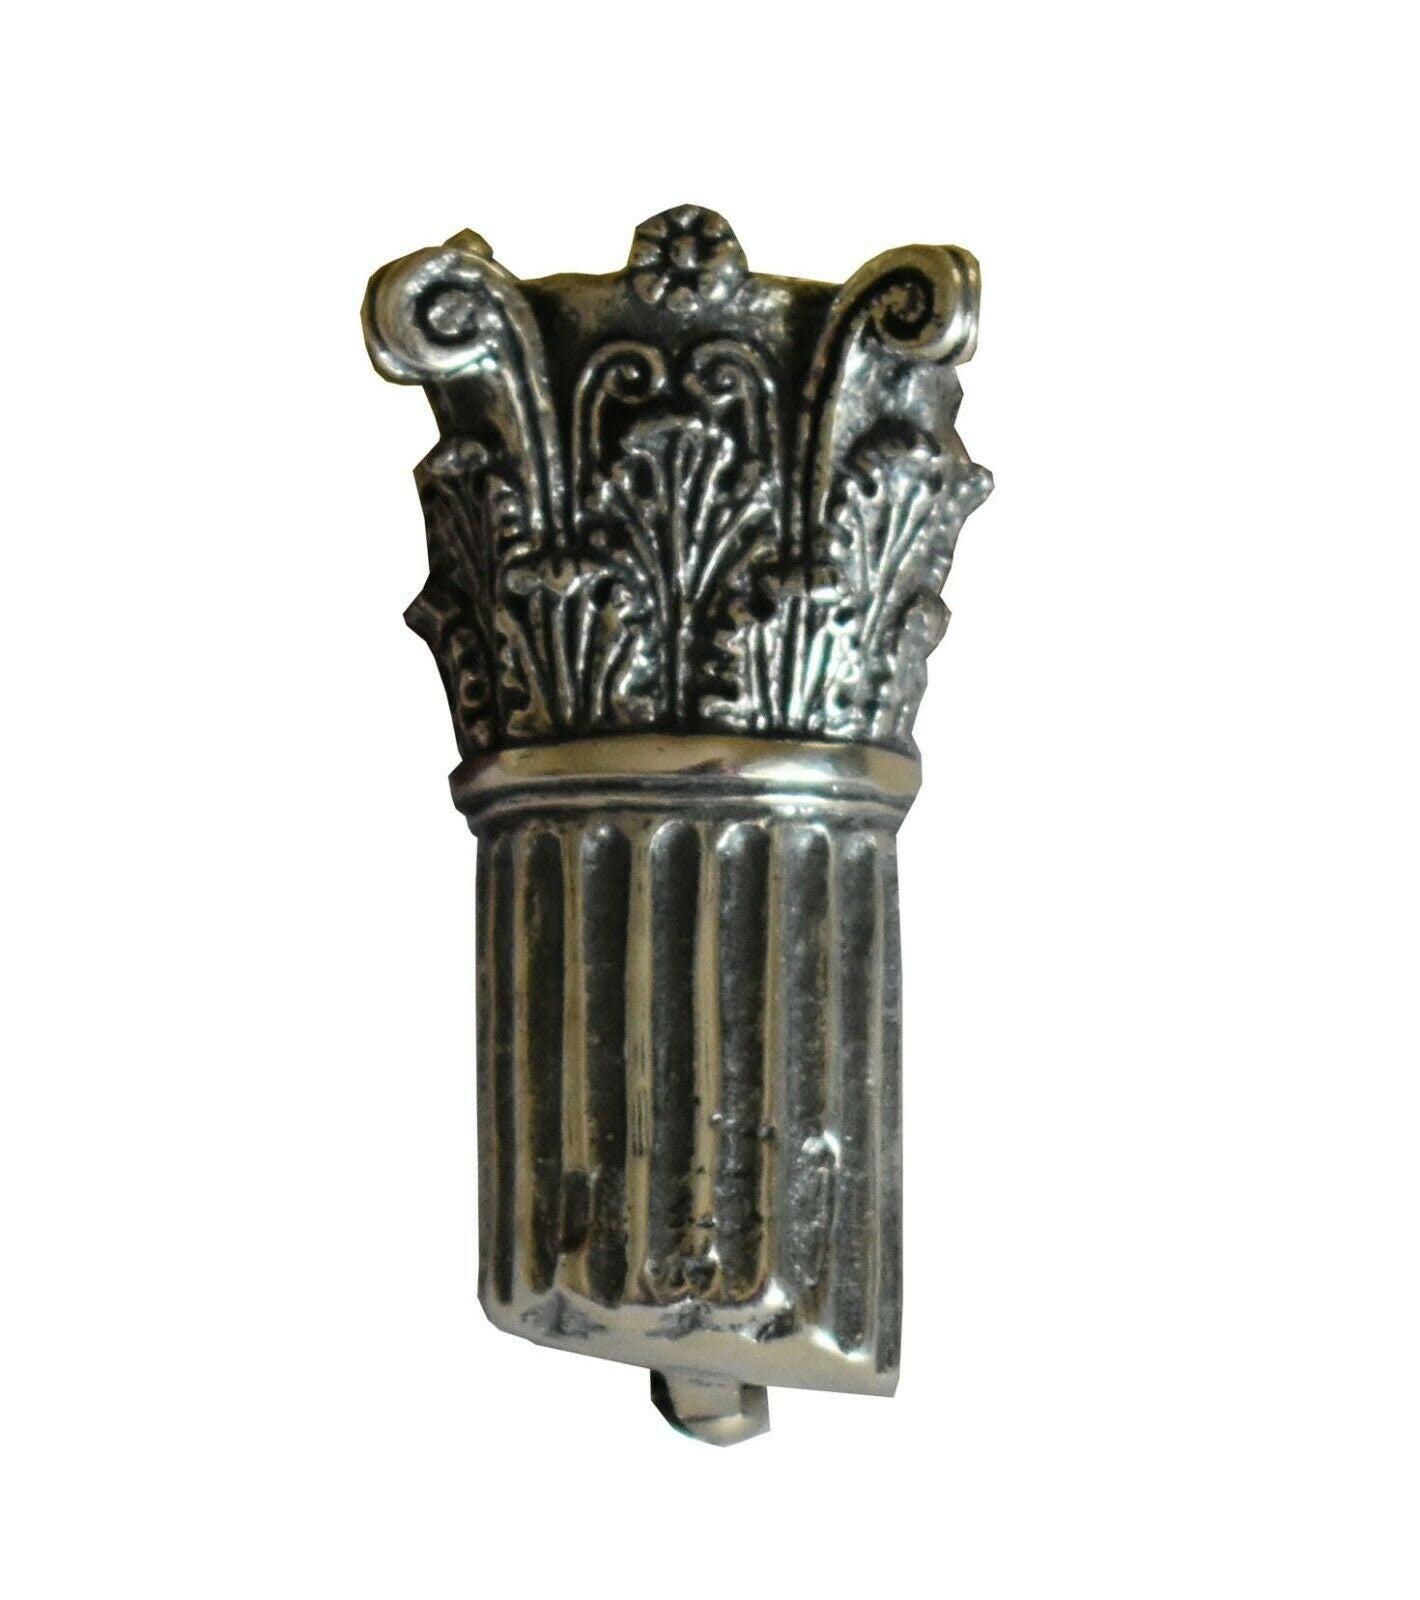 Corinthian Order - Column - Top Part - Acanthus  Leaves and Scrolls - Ancient Greek architecture - Brooch Pin - 925 Sterling Silver